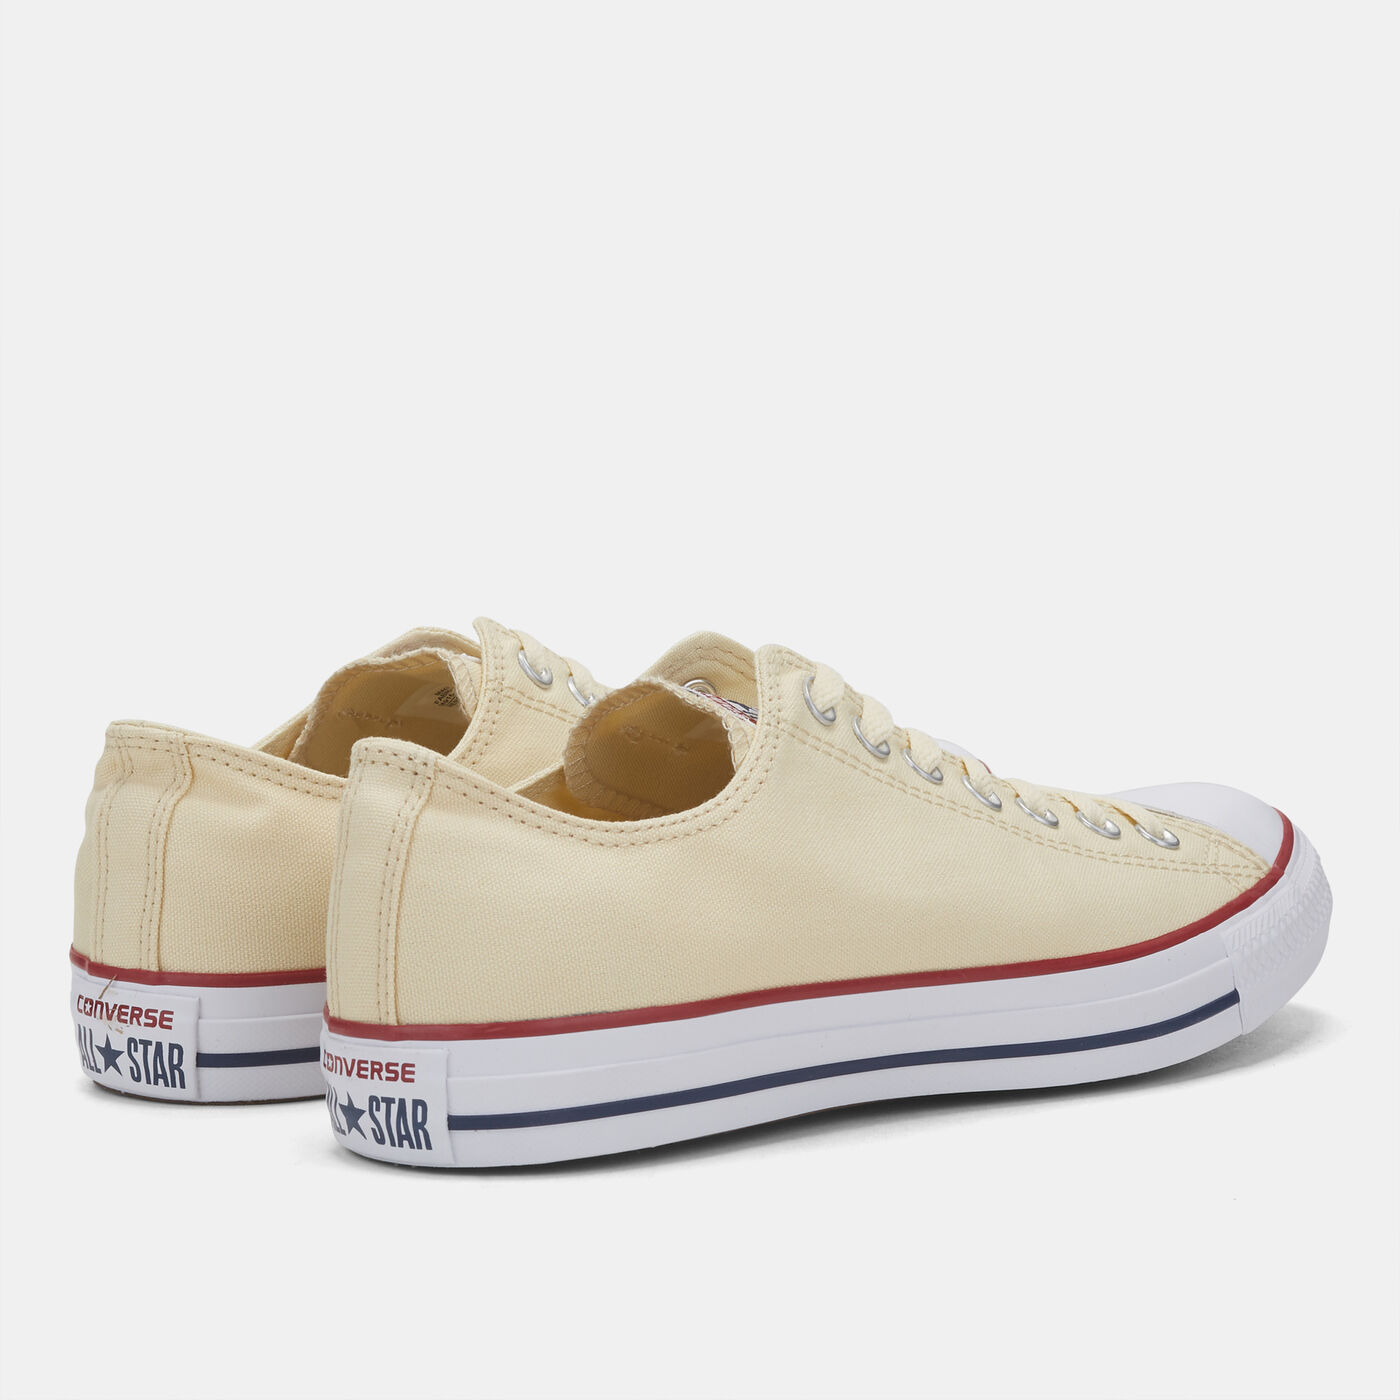 Chuck Taylor All Star Core Oxford Unisex Shoe